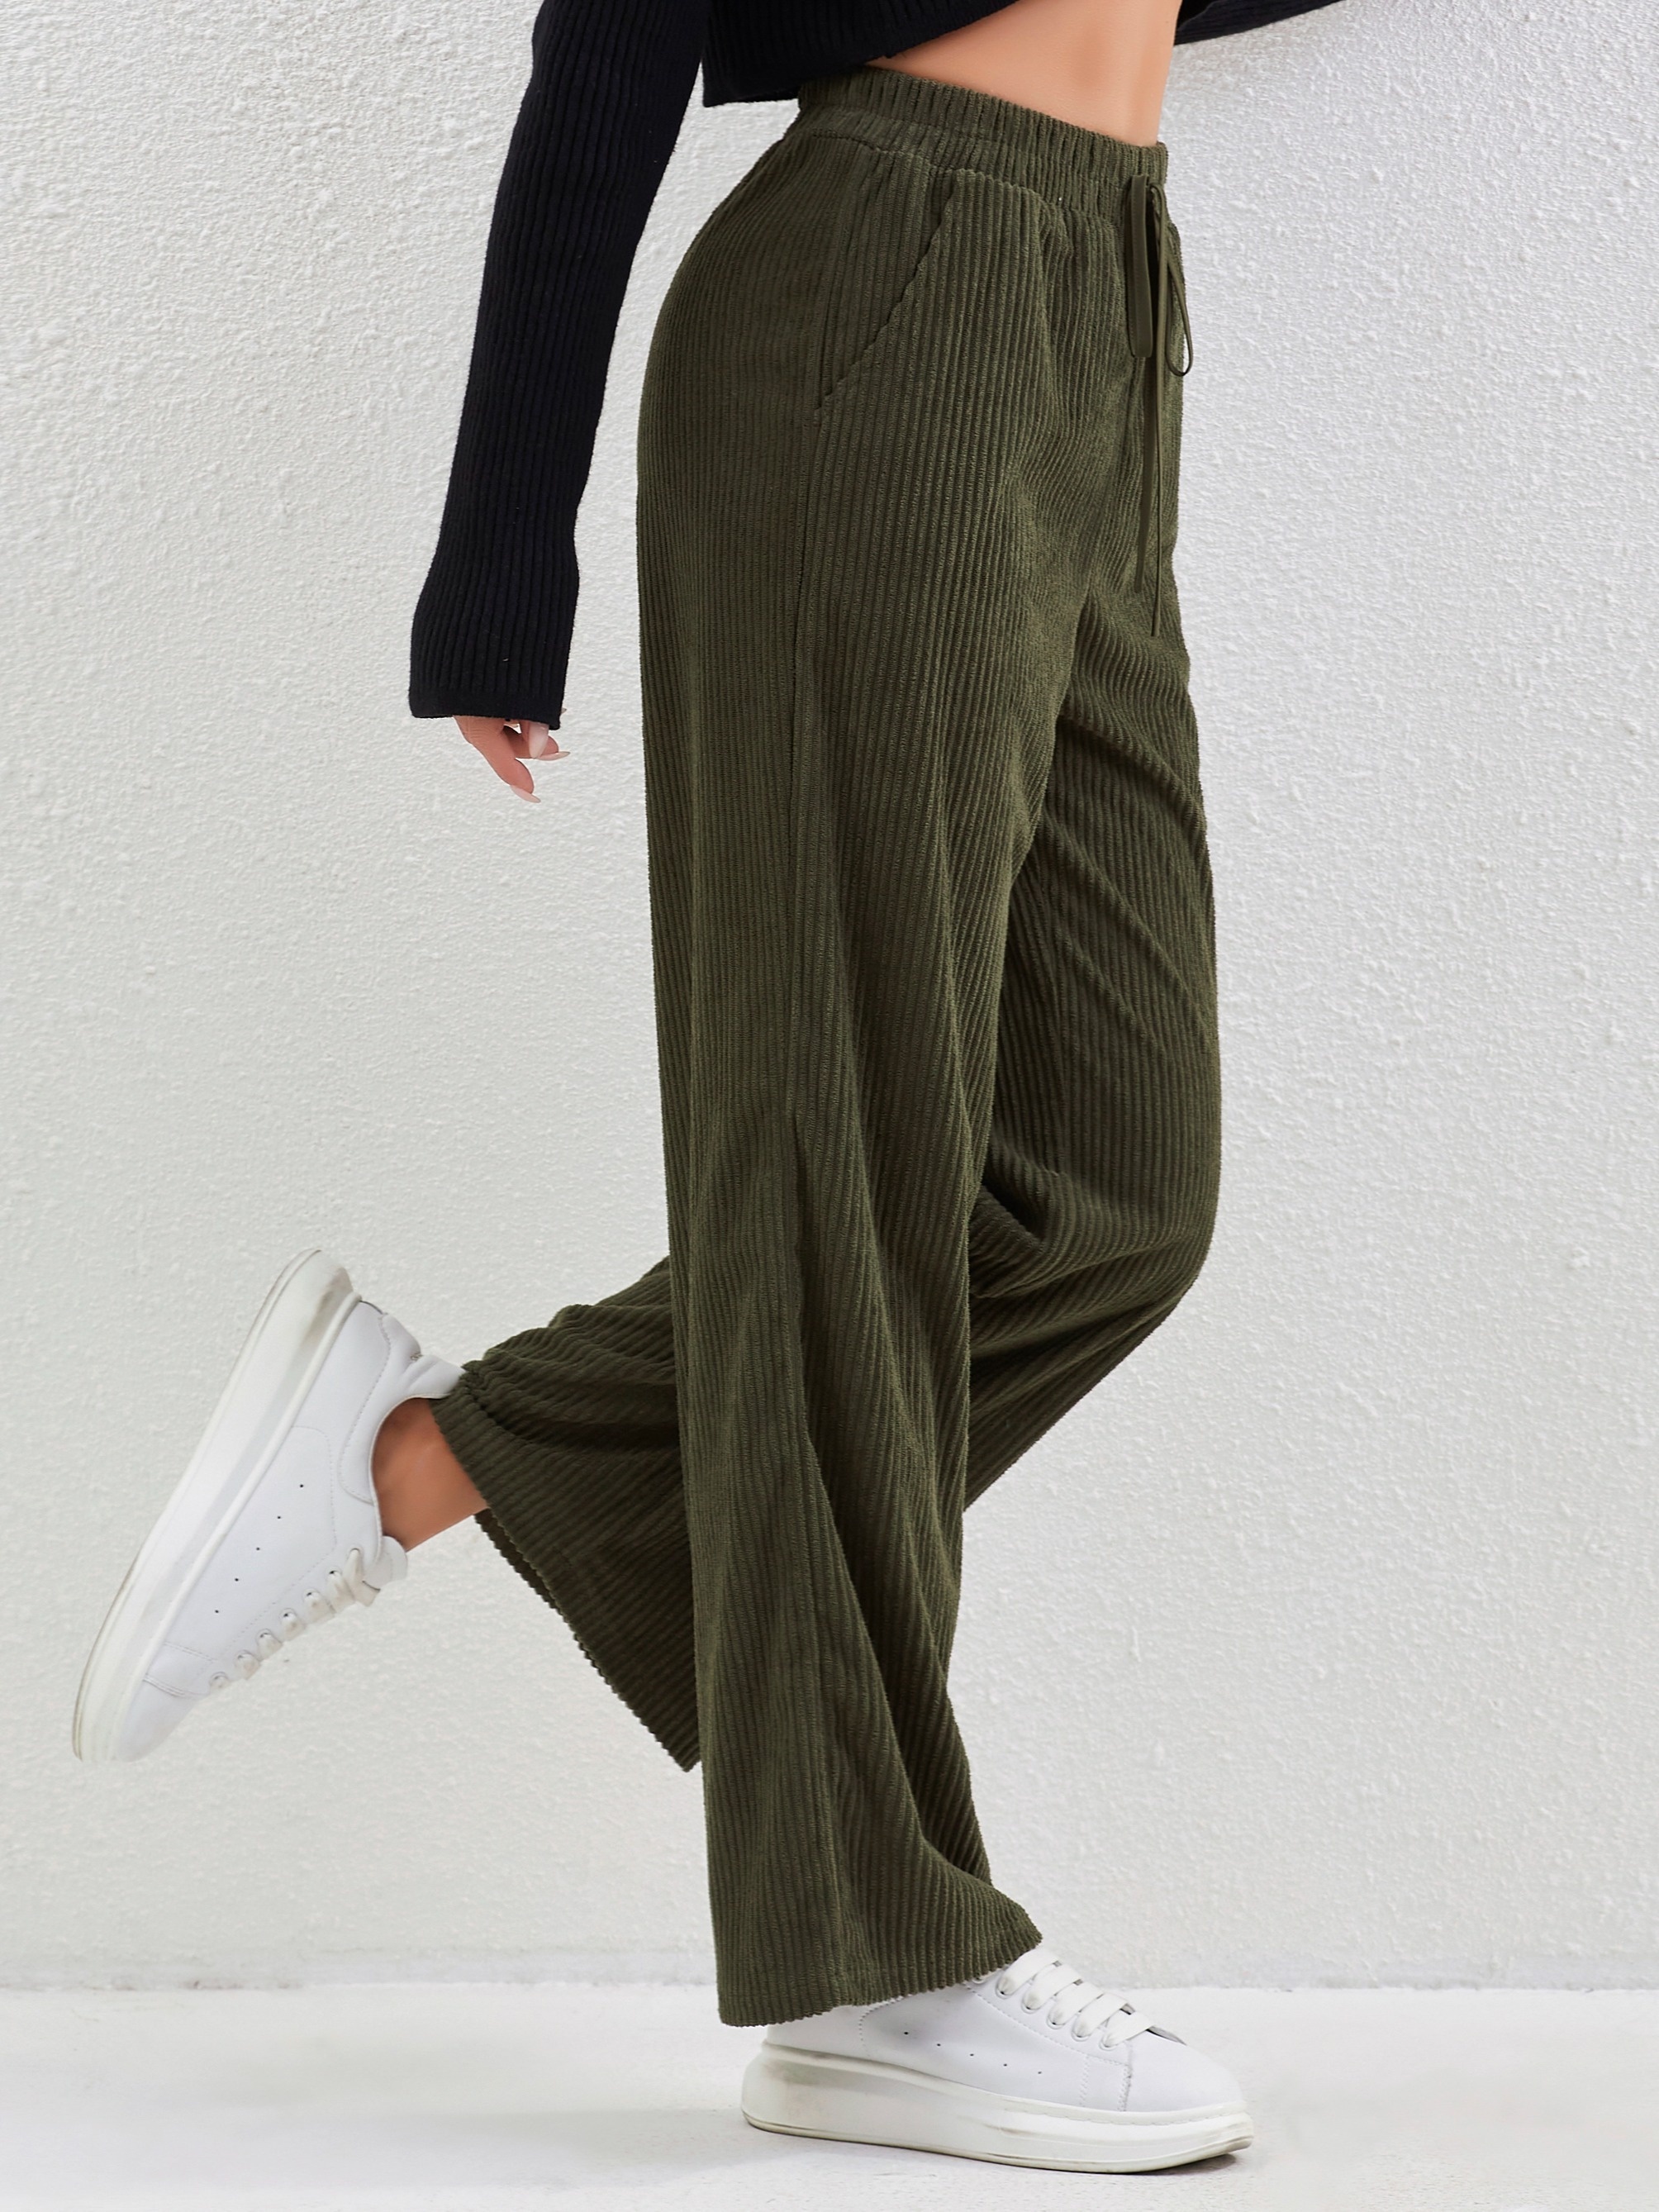 solid corduroy straight leg pants casual high waist loose pants with pocket womens clothing details 6